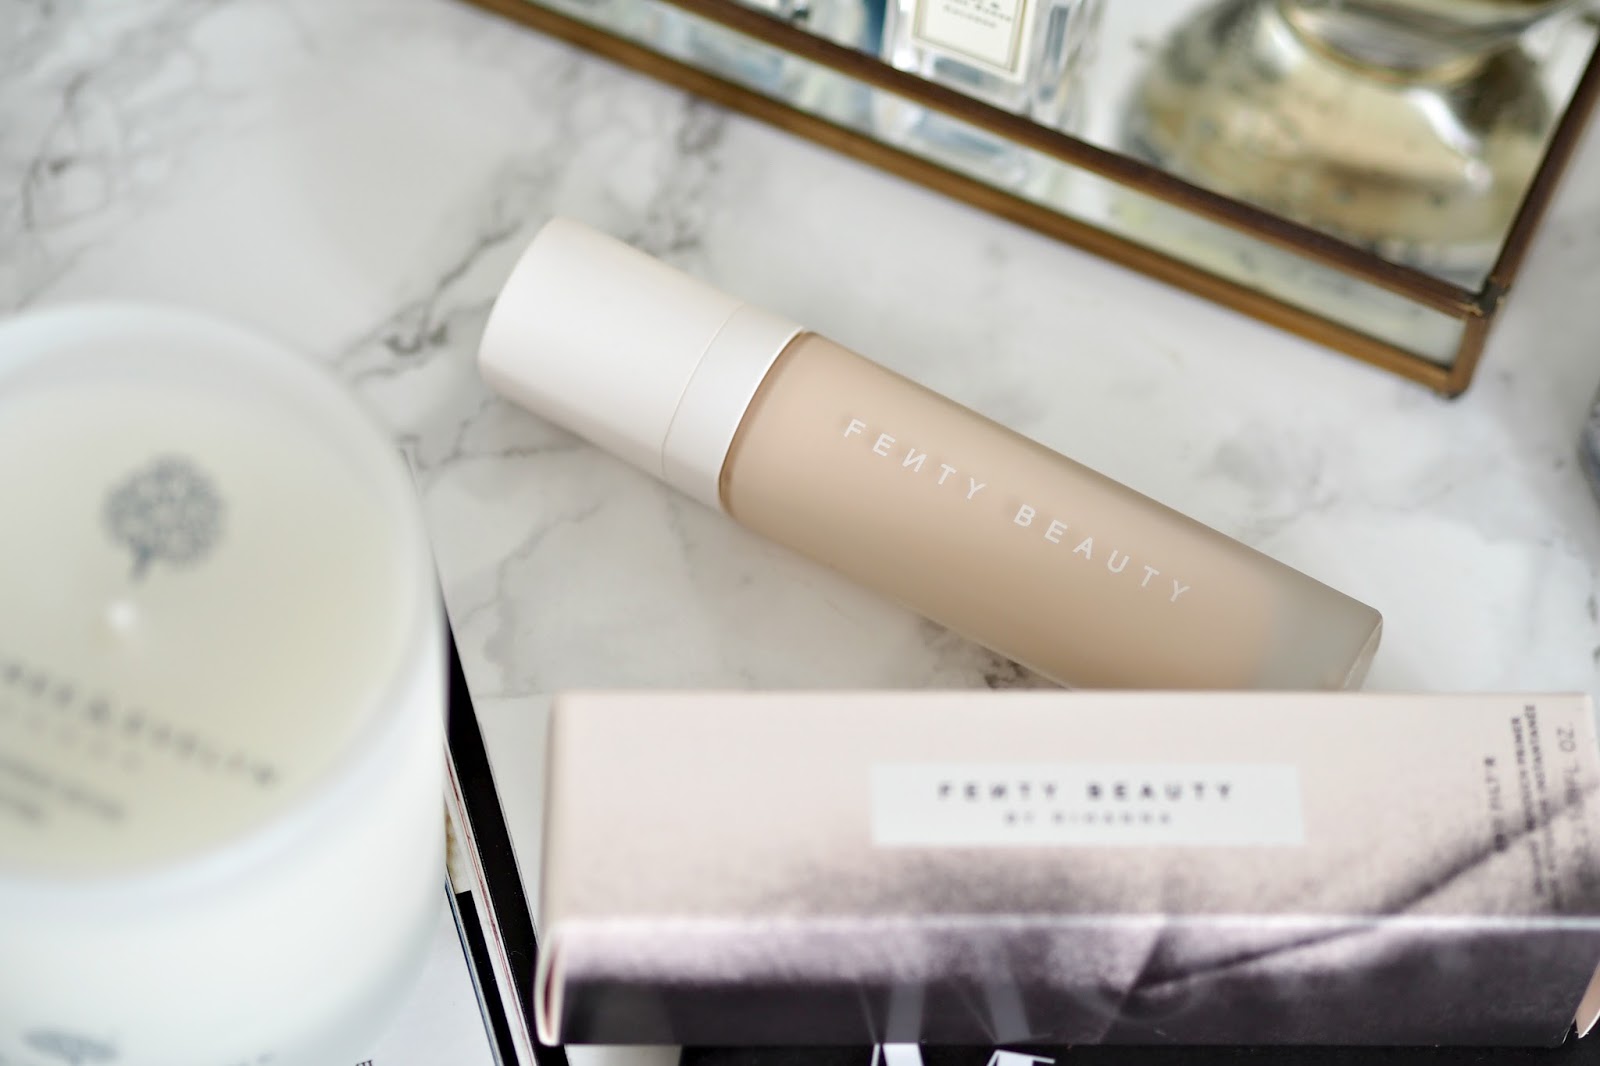 Fenty Beauty Pro Filt'r Soft Matte Longwear Foundation - Shade 110 review and swatches